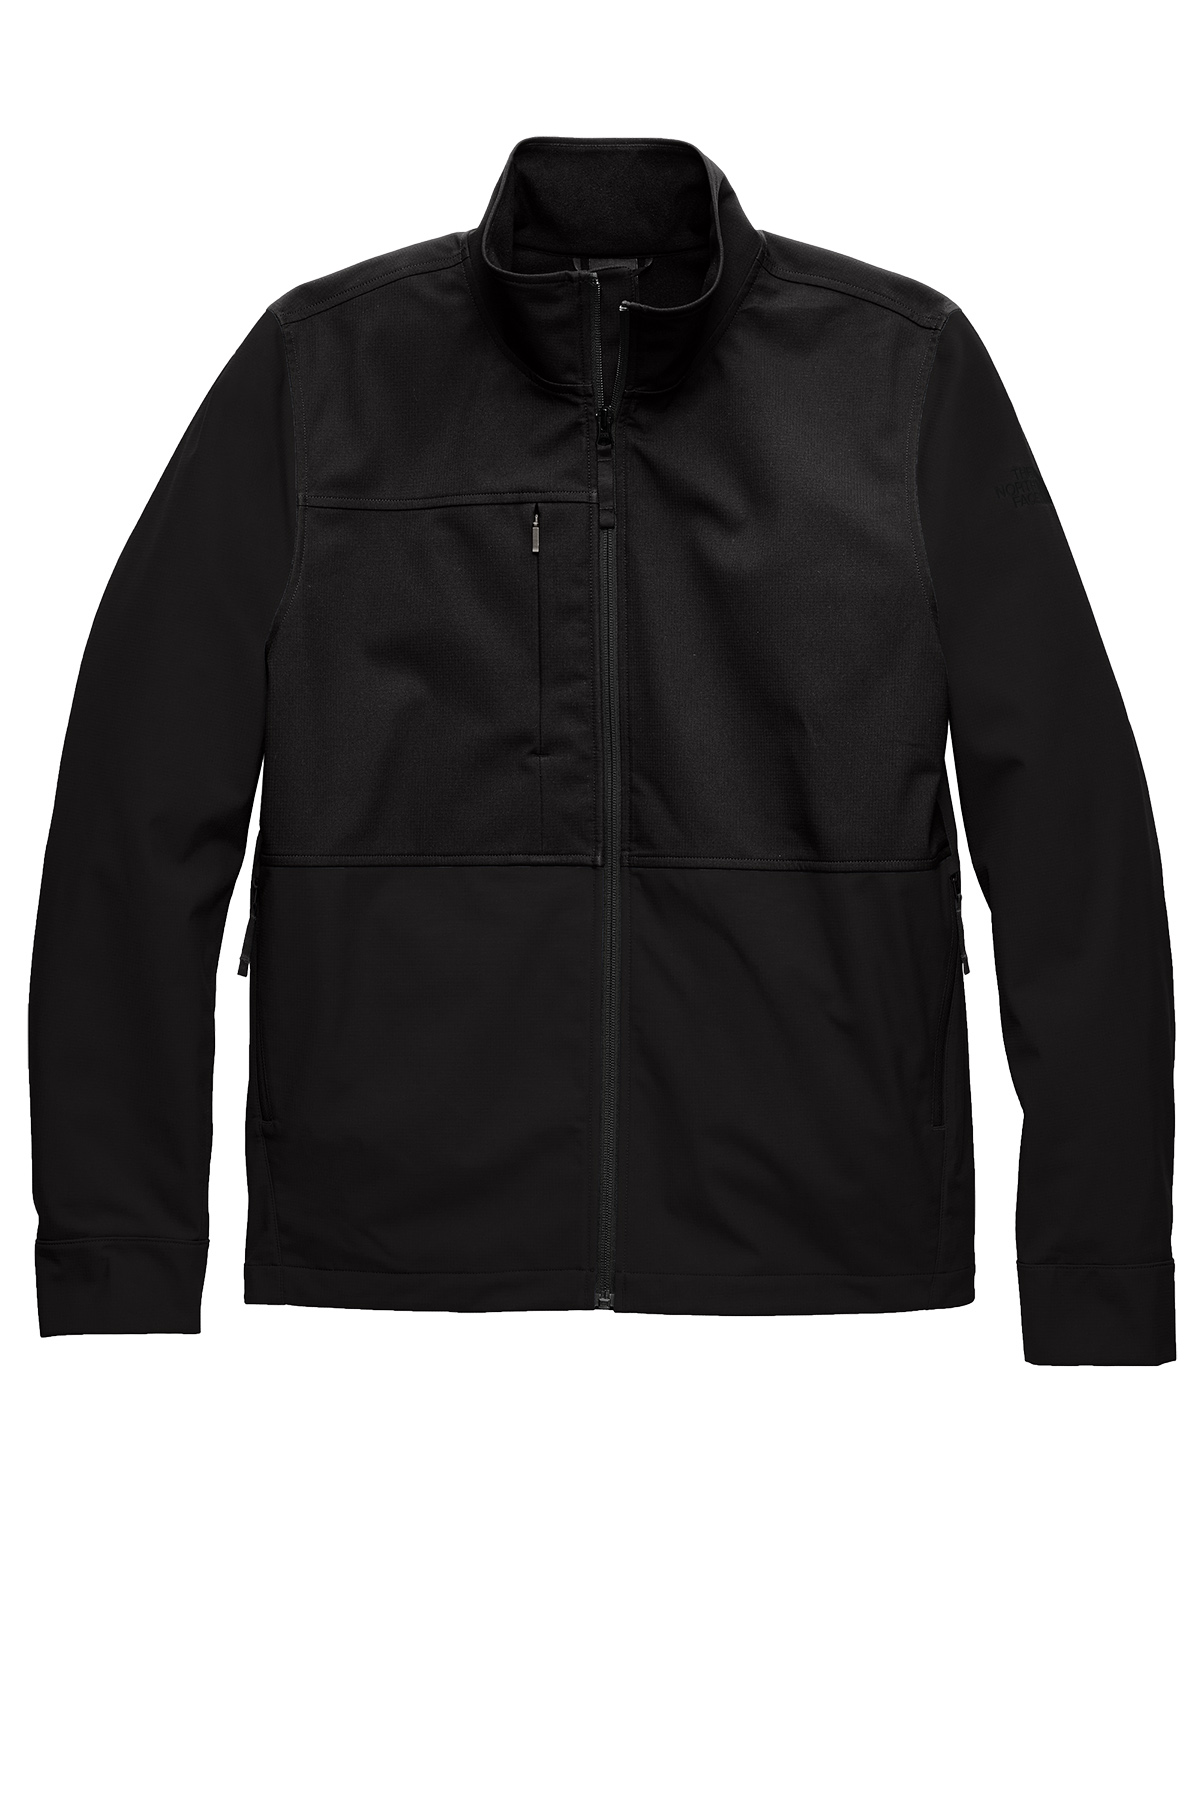 Custom Branded The North Face Branded Jackets & Vests Jackets - The North Face Black